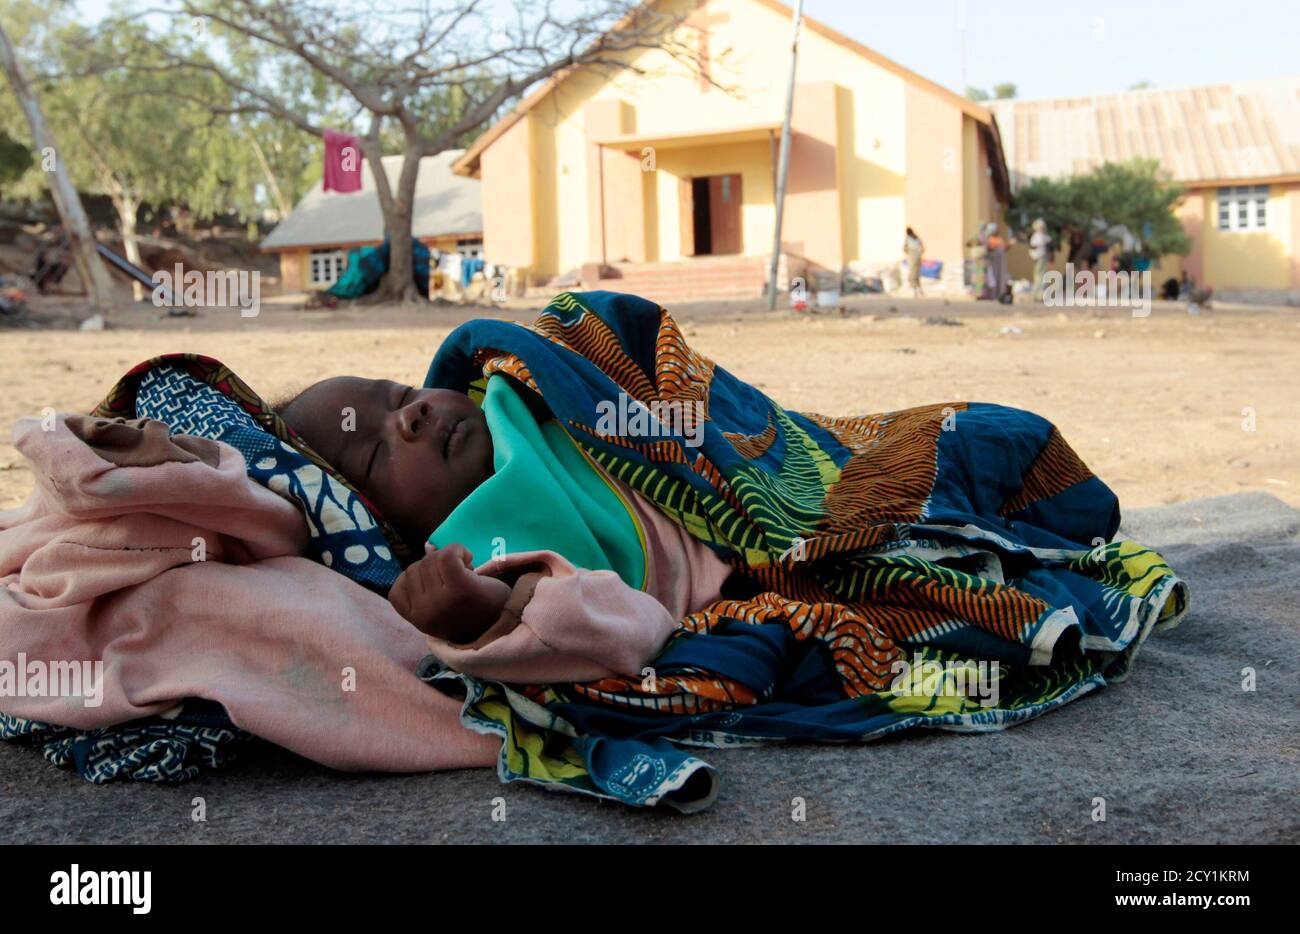 Baby Lurky, whose family was displaced as a result of Boko Haram attacks in the northeast region of Nigeria, sleeps in the shade at a camp for internally displaced people (IDP) in Yola, Adamawa State January 14, 2015. Boko Haram says it is building an Islamic state that will revive the glory days of northern Nigeria's medieval Muslim empires, but for those in its territory life is a litany of killings, kidnappings, hunger and economic collapse. Baby Lurky is one of over one hundred children born in the camps in Adamawa State since the community's displacement from their hometown in August 2014 Stock Photo